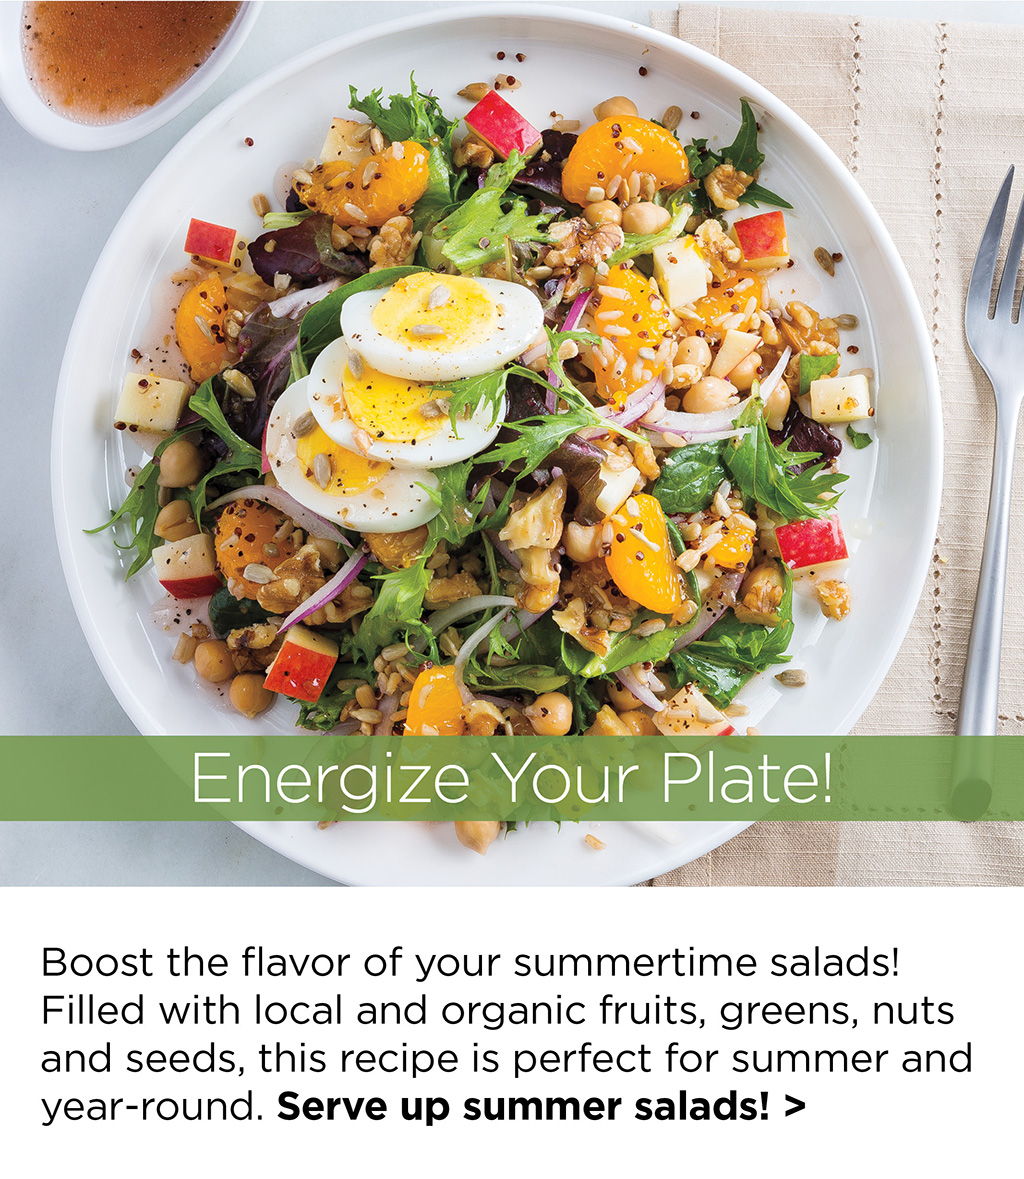 Energize Your Plate! - Boost the flavor of your summertime salads! Filled with local and organic fruits, greens, nuts and seeds, this recipe is perfect for summer and year-round. Serve up summer salads! >